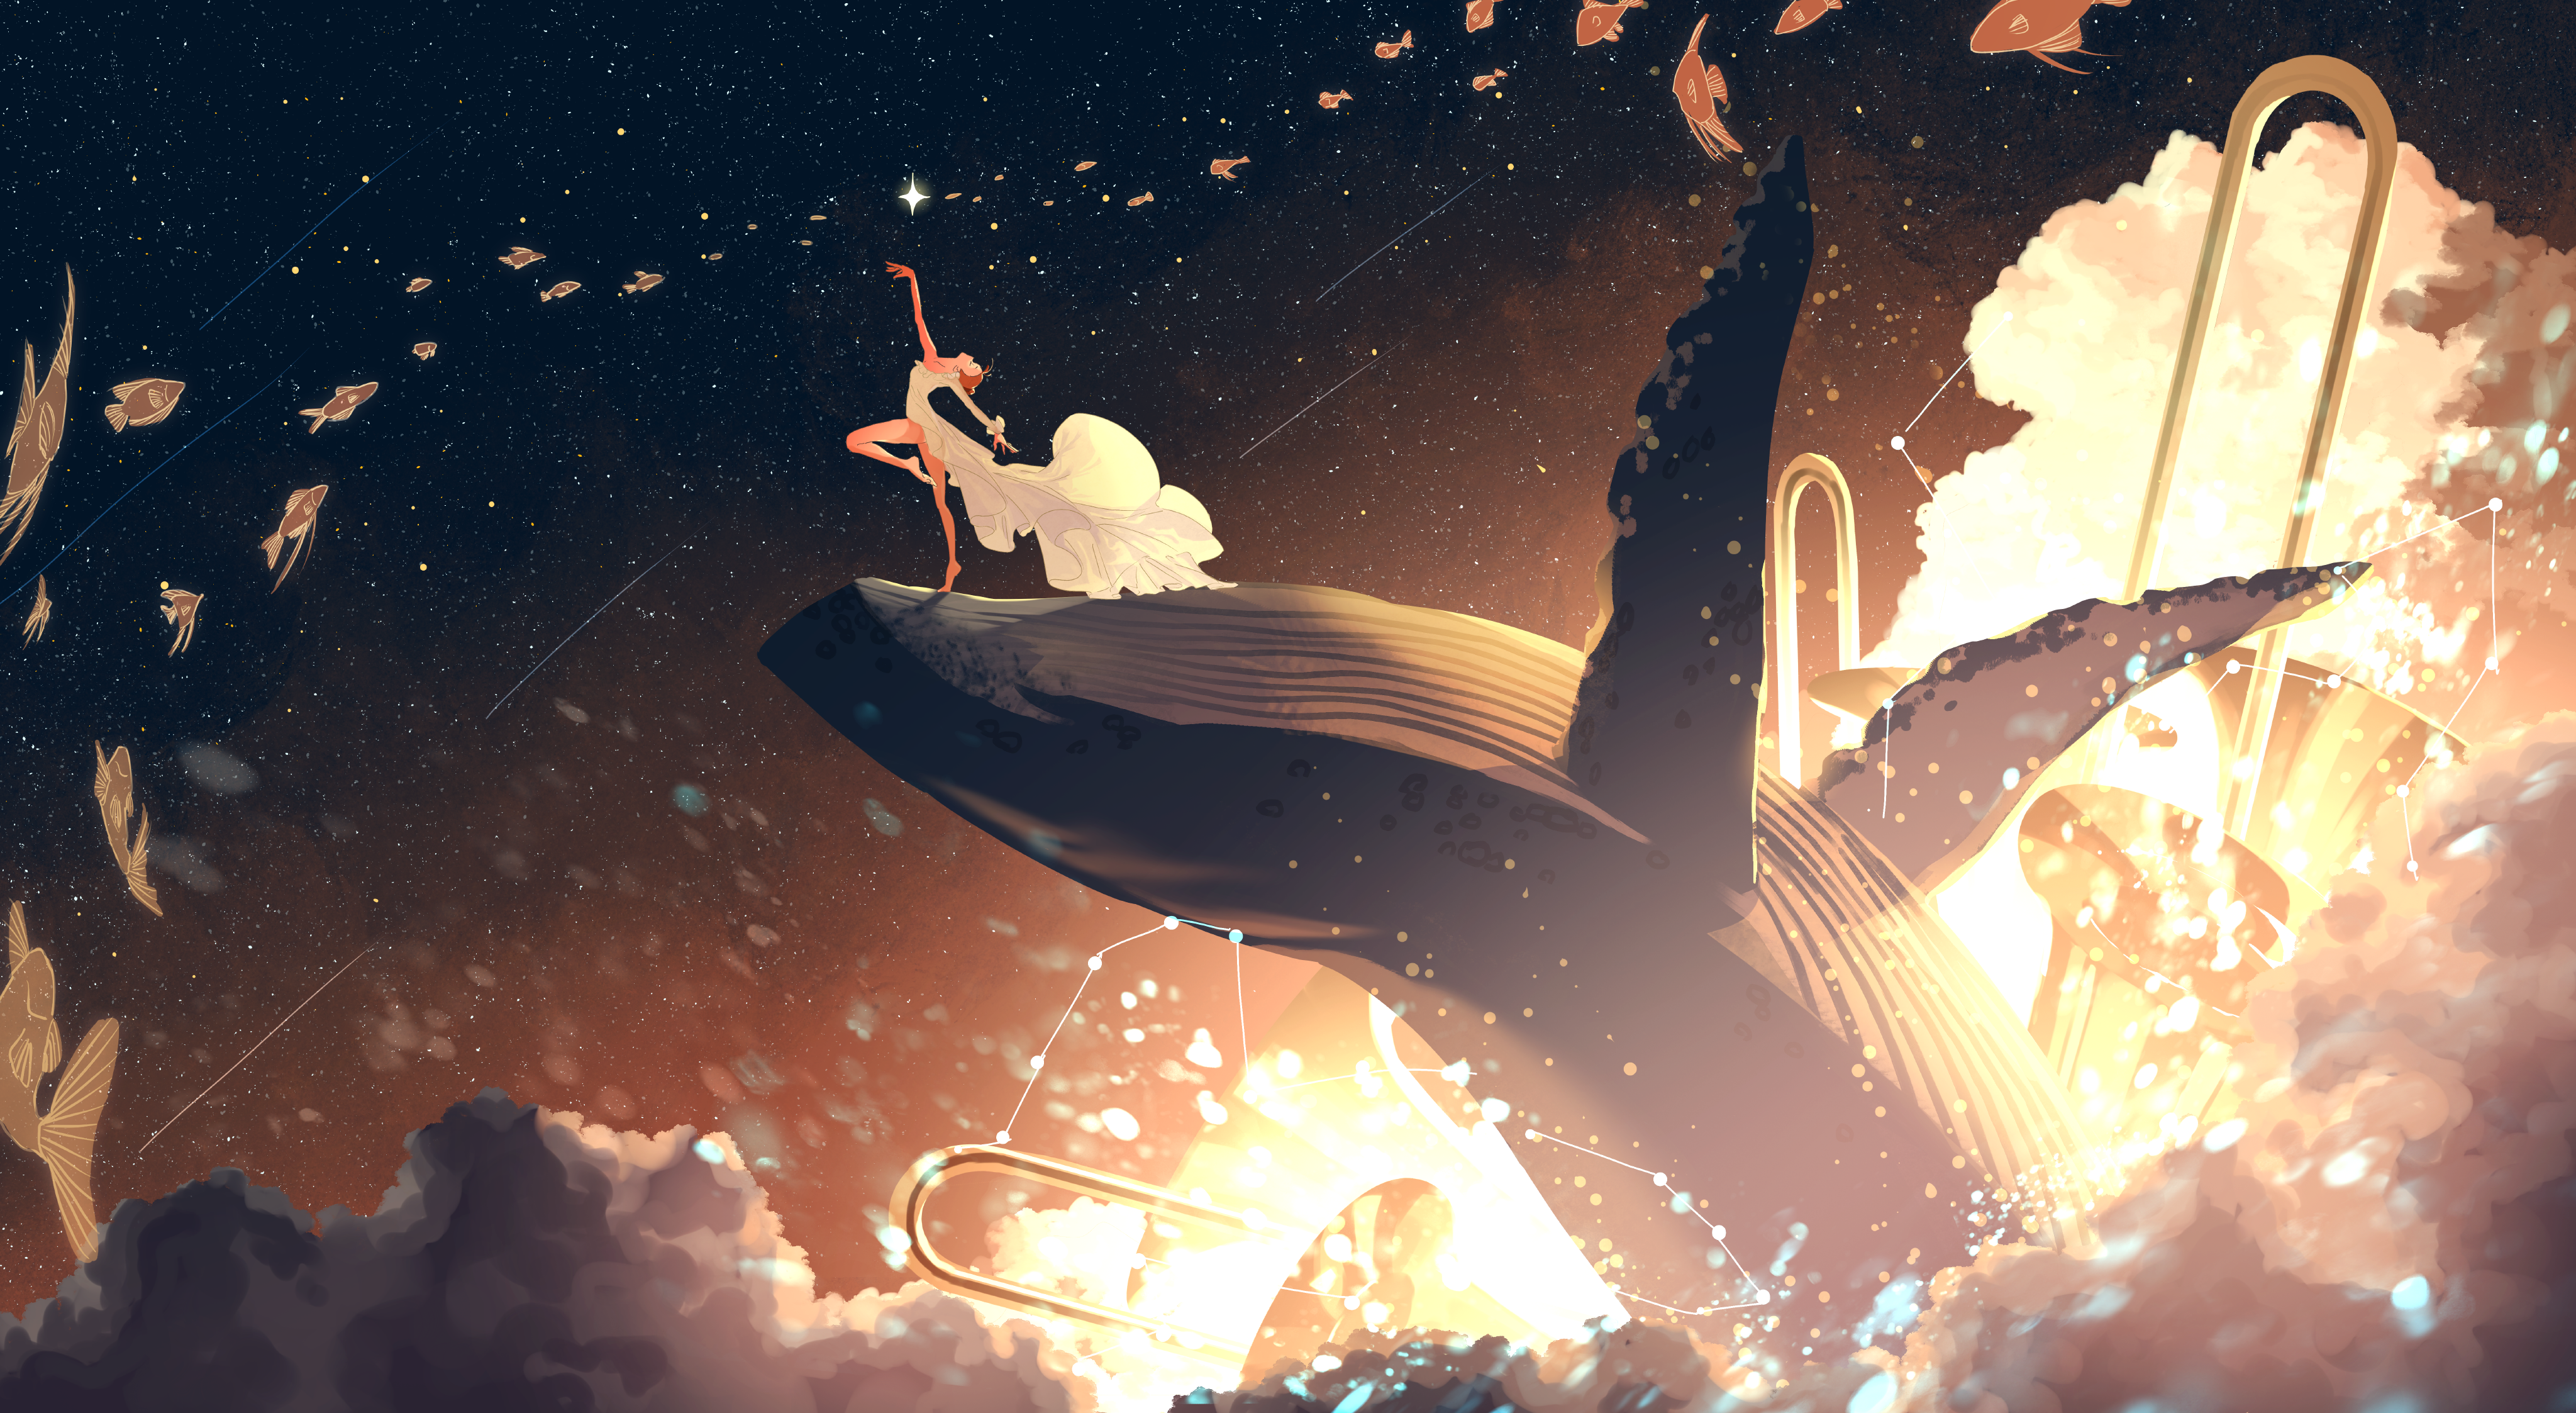 Anime Anime Girls Stars Space Universe Fish Clouds Whale Dancing Trumpet Redhead Dress 4096x2246